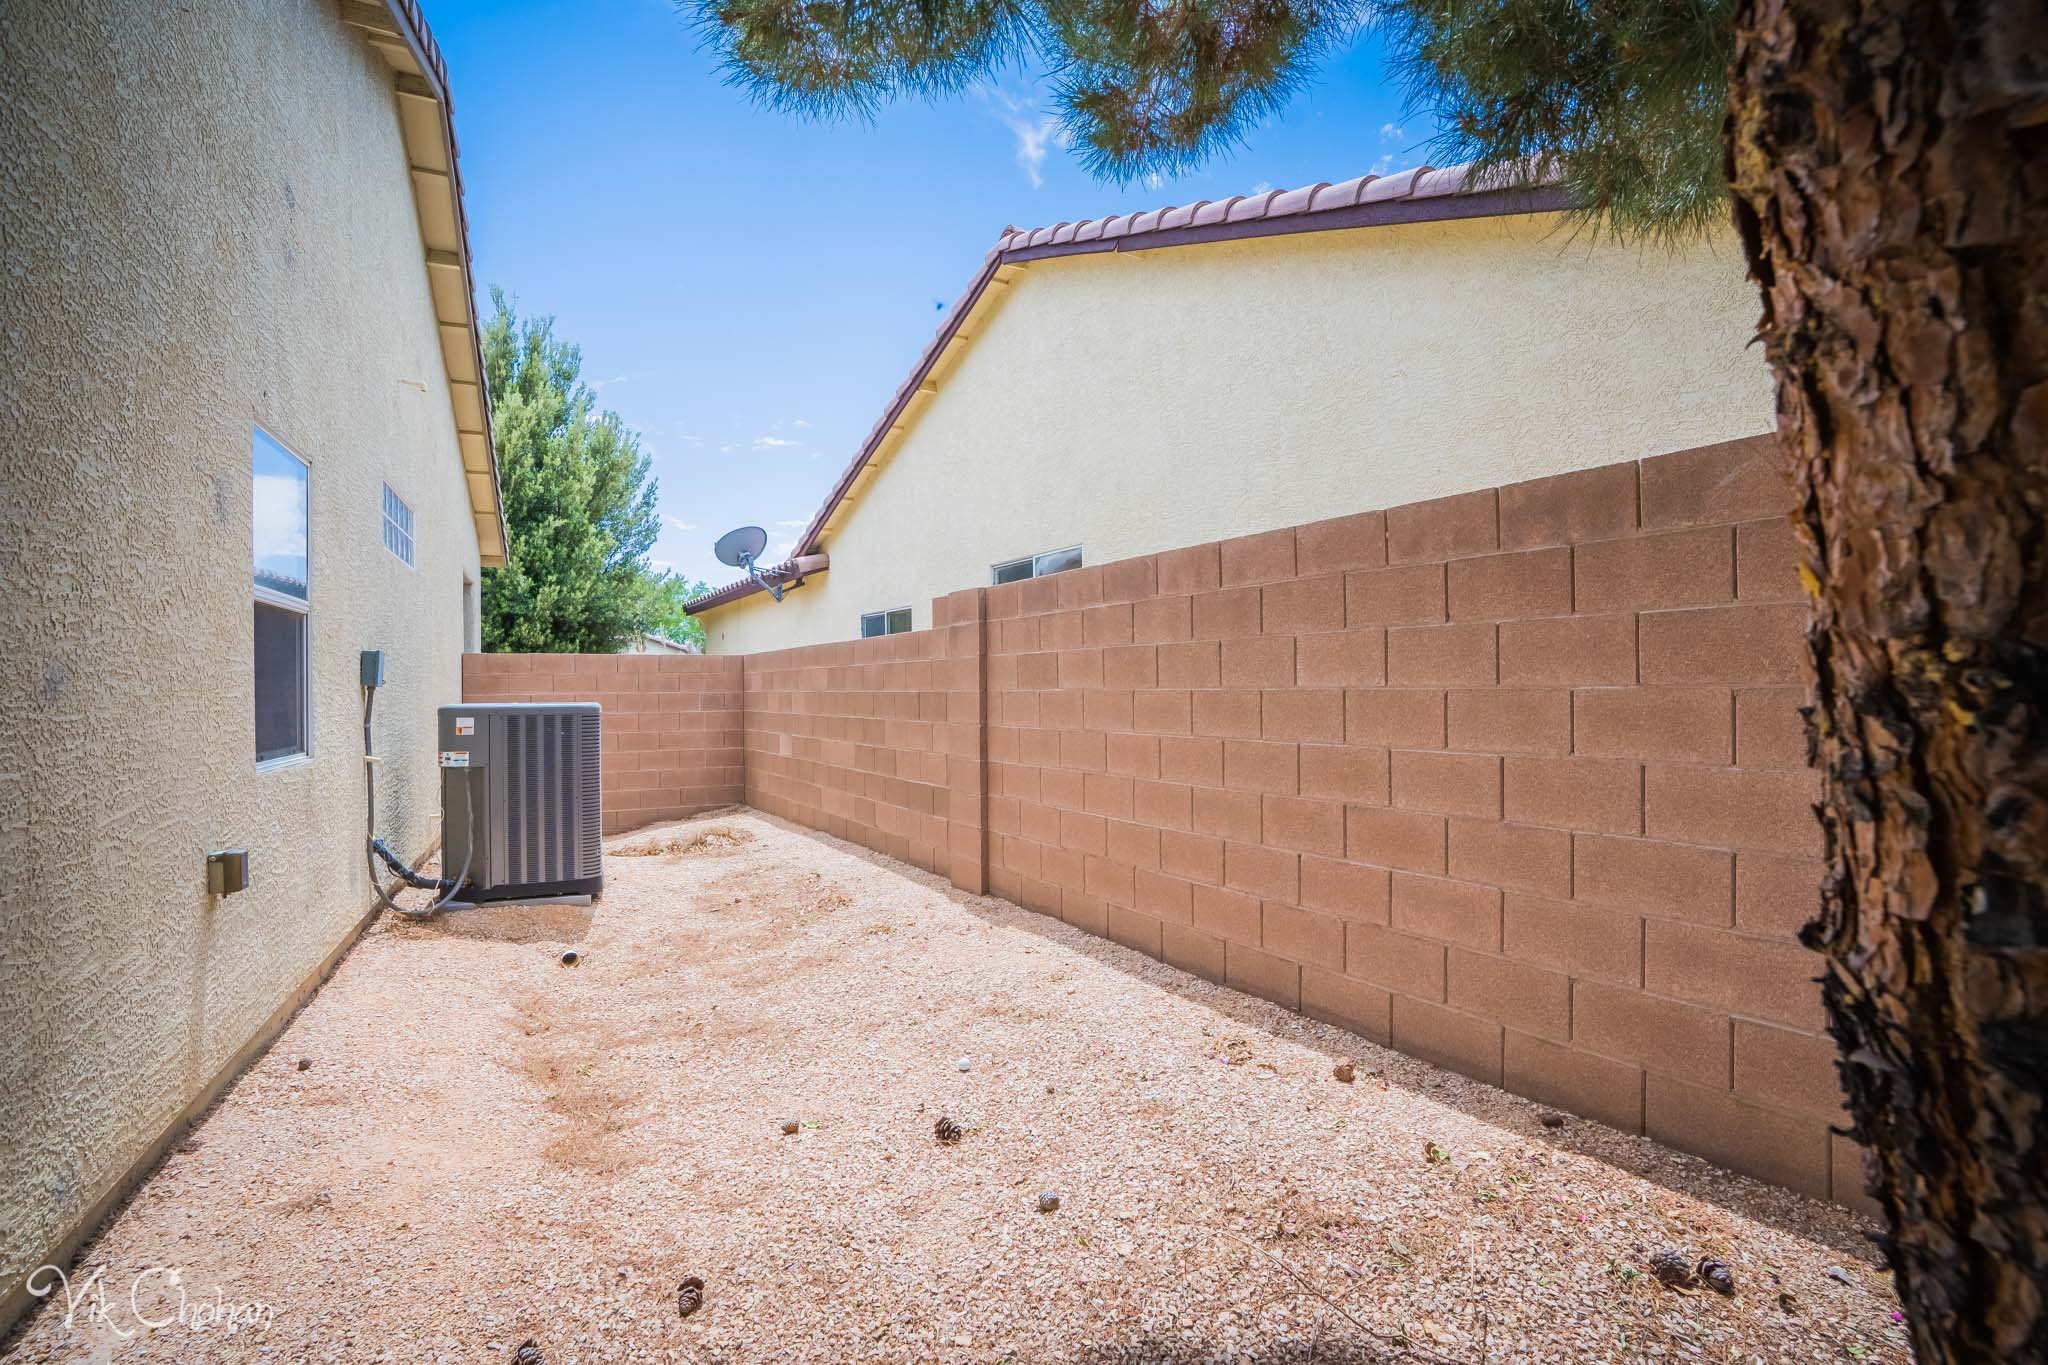 2022-05-15-5378-E-Cansano-St-Pahrump-Real-Estate-Photography-Virtual-Tour-Drone-Photography-Vik-Chohan-Photography-Photo-Booth-Social-Media-VCP-093.jpg